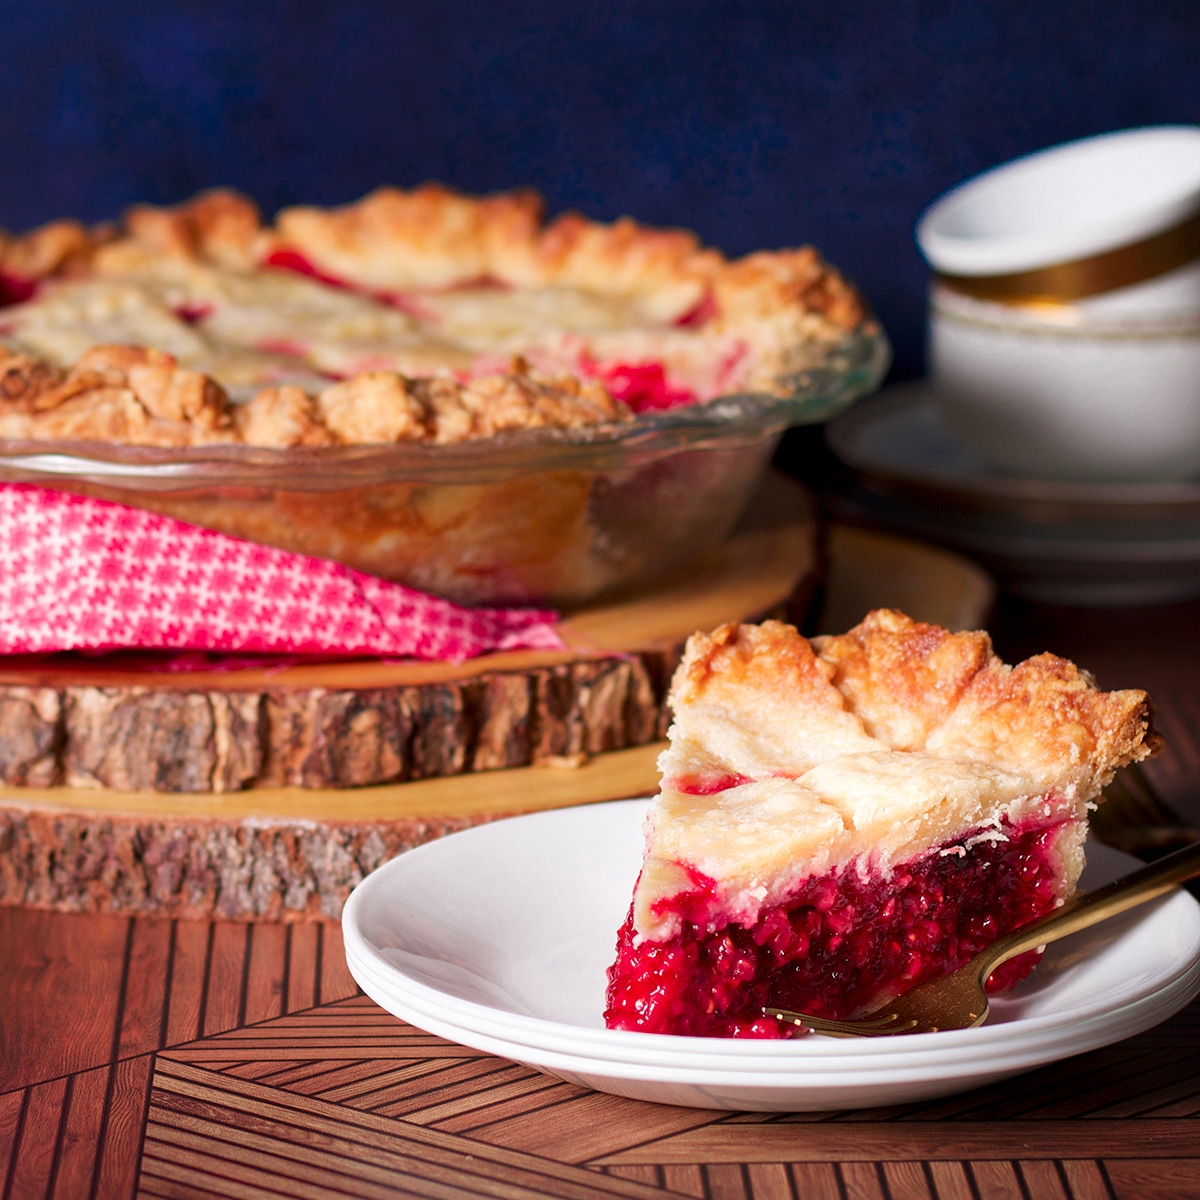 A slice of raspberry pie on a white plate sitting on a wood table next to a coffee cup.